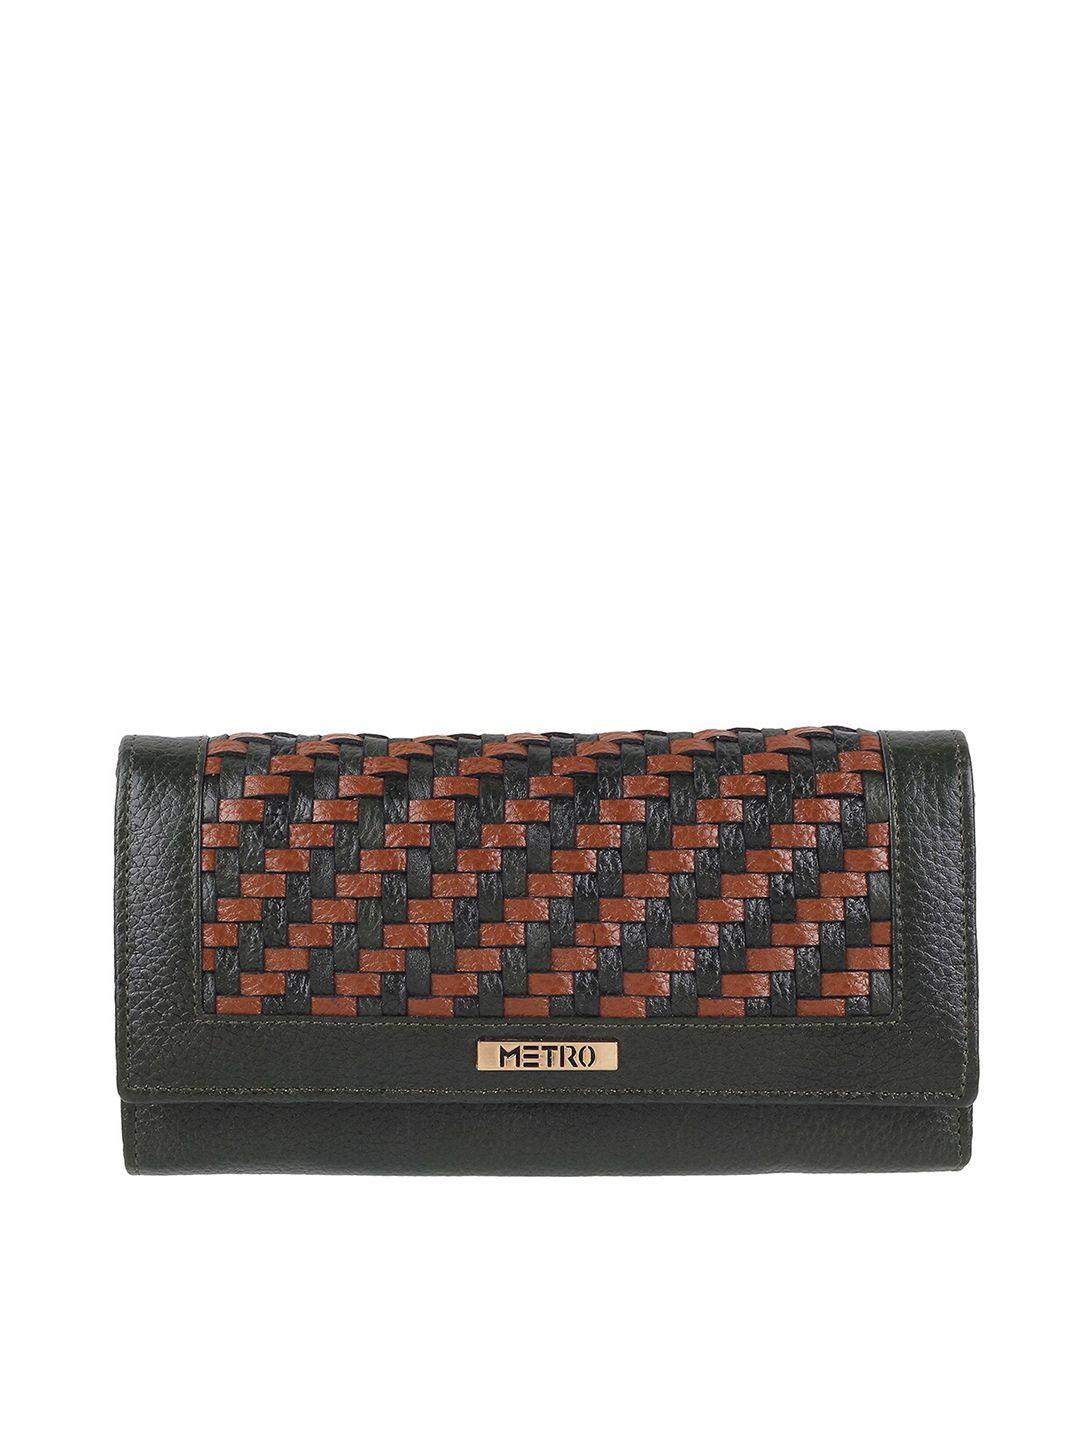 metro-women-checked-leather-two-fold-wallet